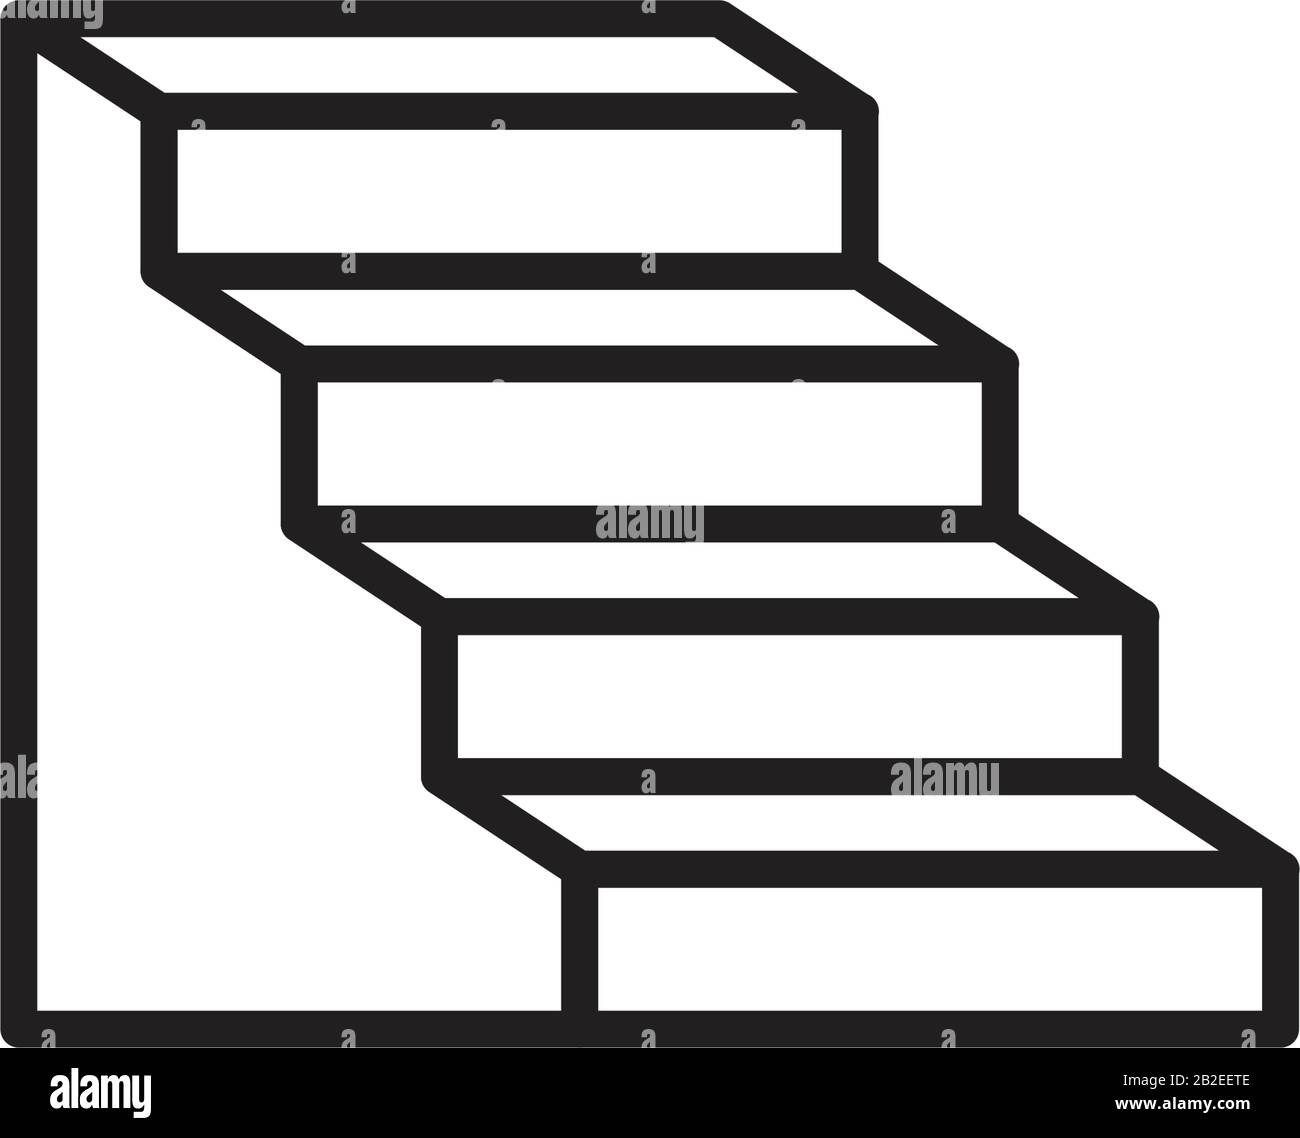 Stairs icon template black color editable. Stairs icon symbol Flat vector illustration for graphic and web design. Stock Vector